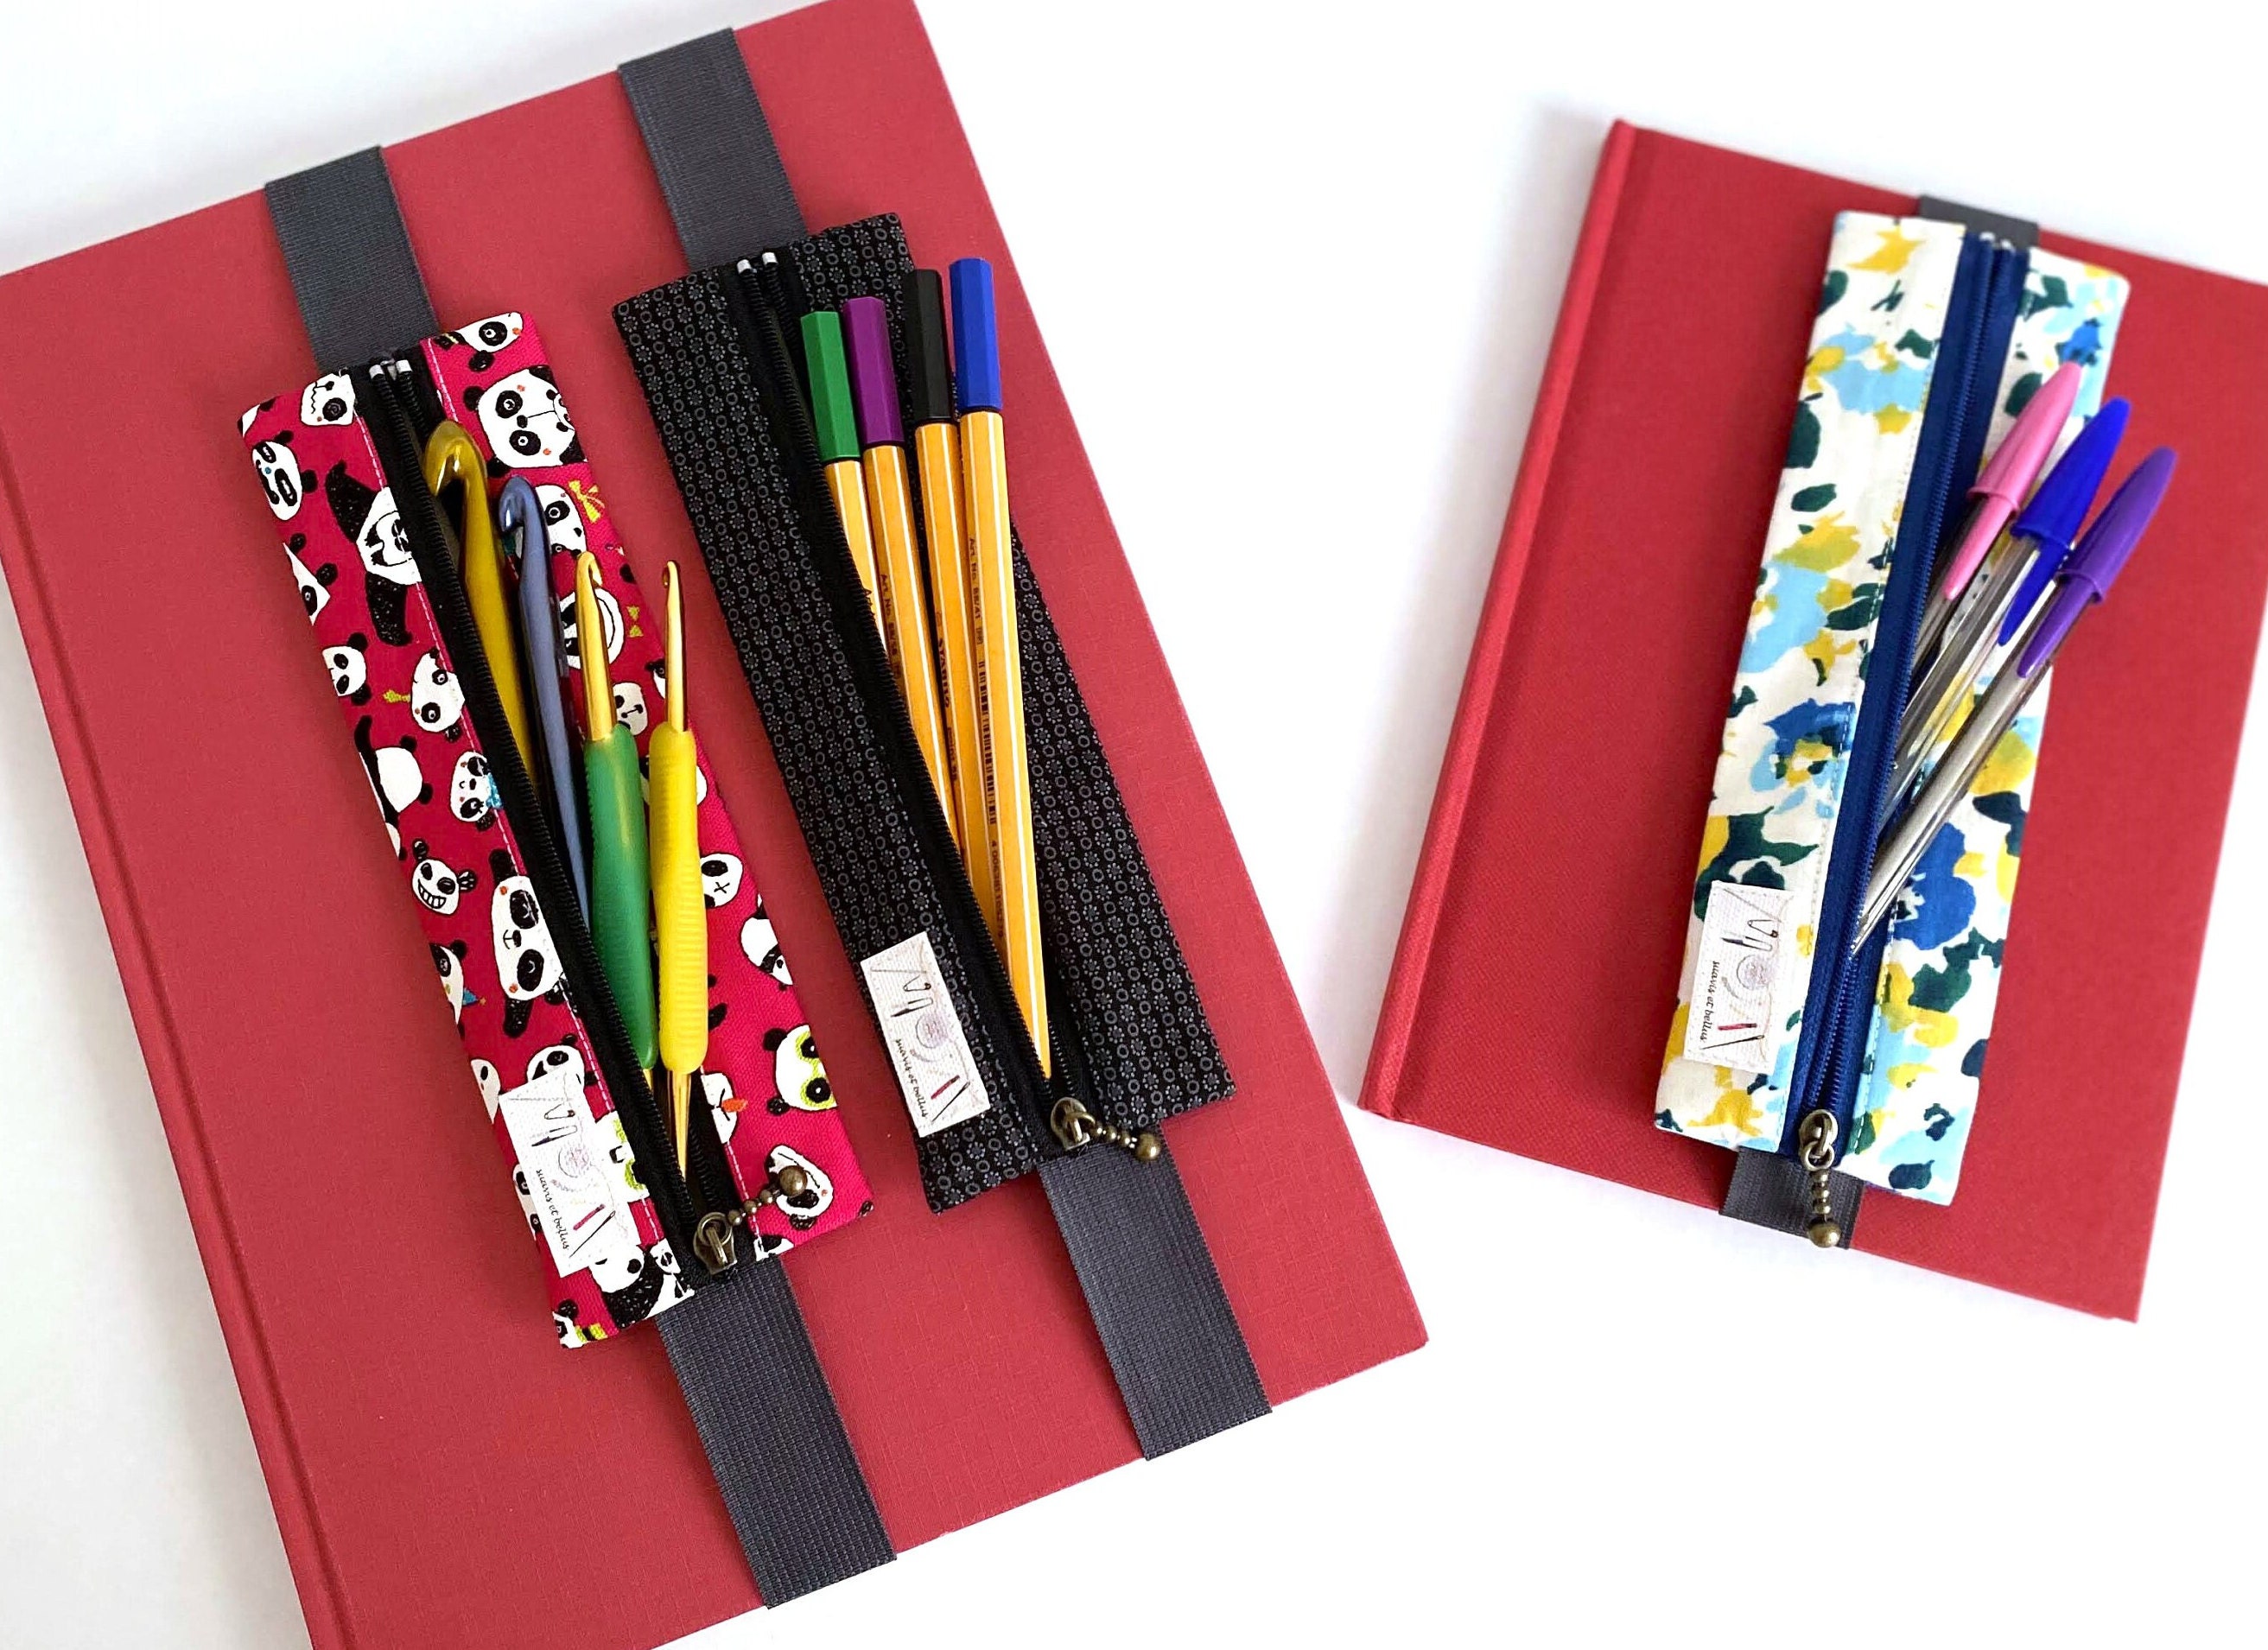 Mr. Pen pencil case is perfect for people who want a versatile and mul